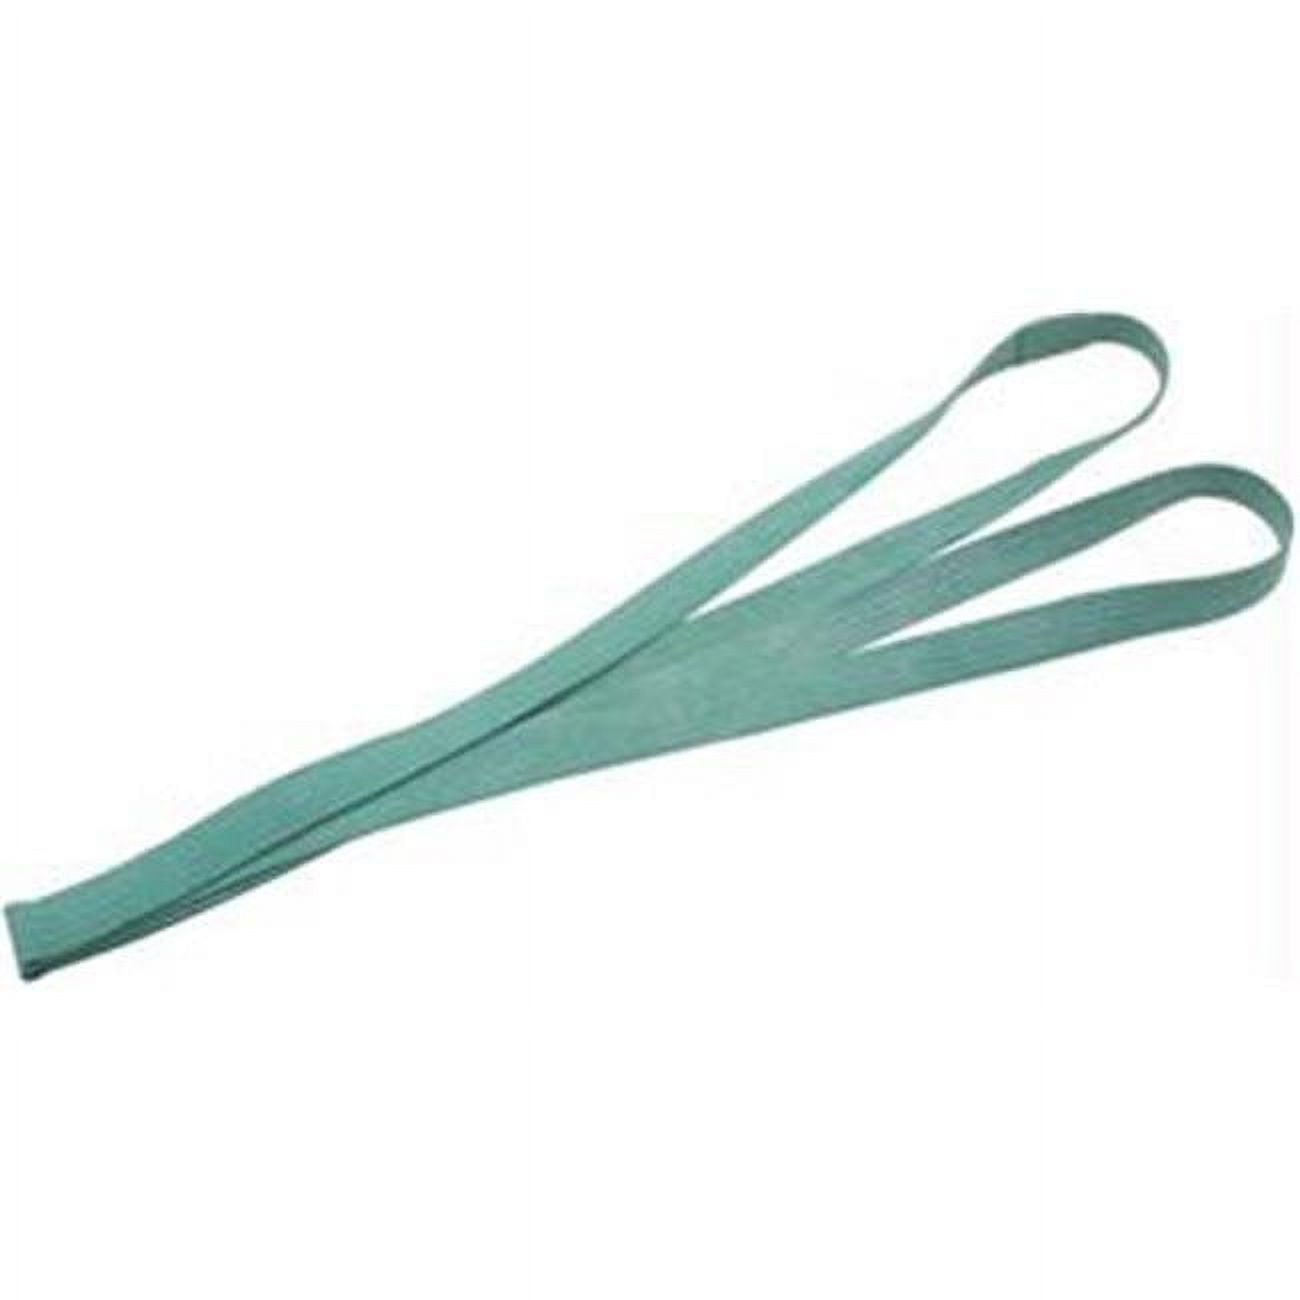 Rubber Bands - #33 Size - Green Rubberbands - 2LB/1000 Count